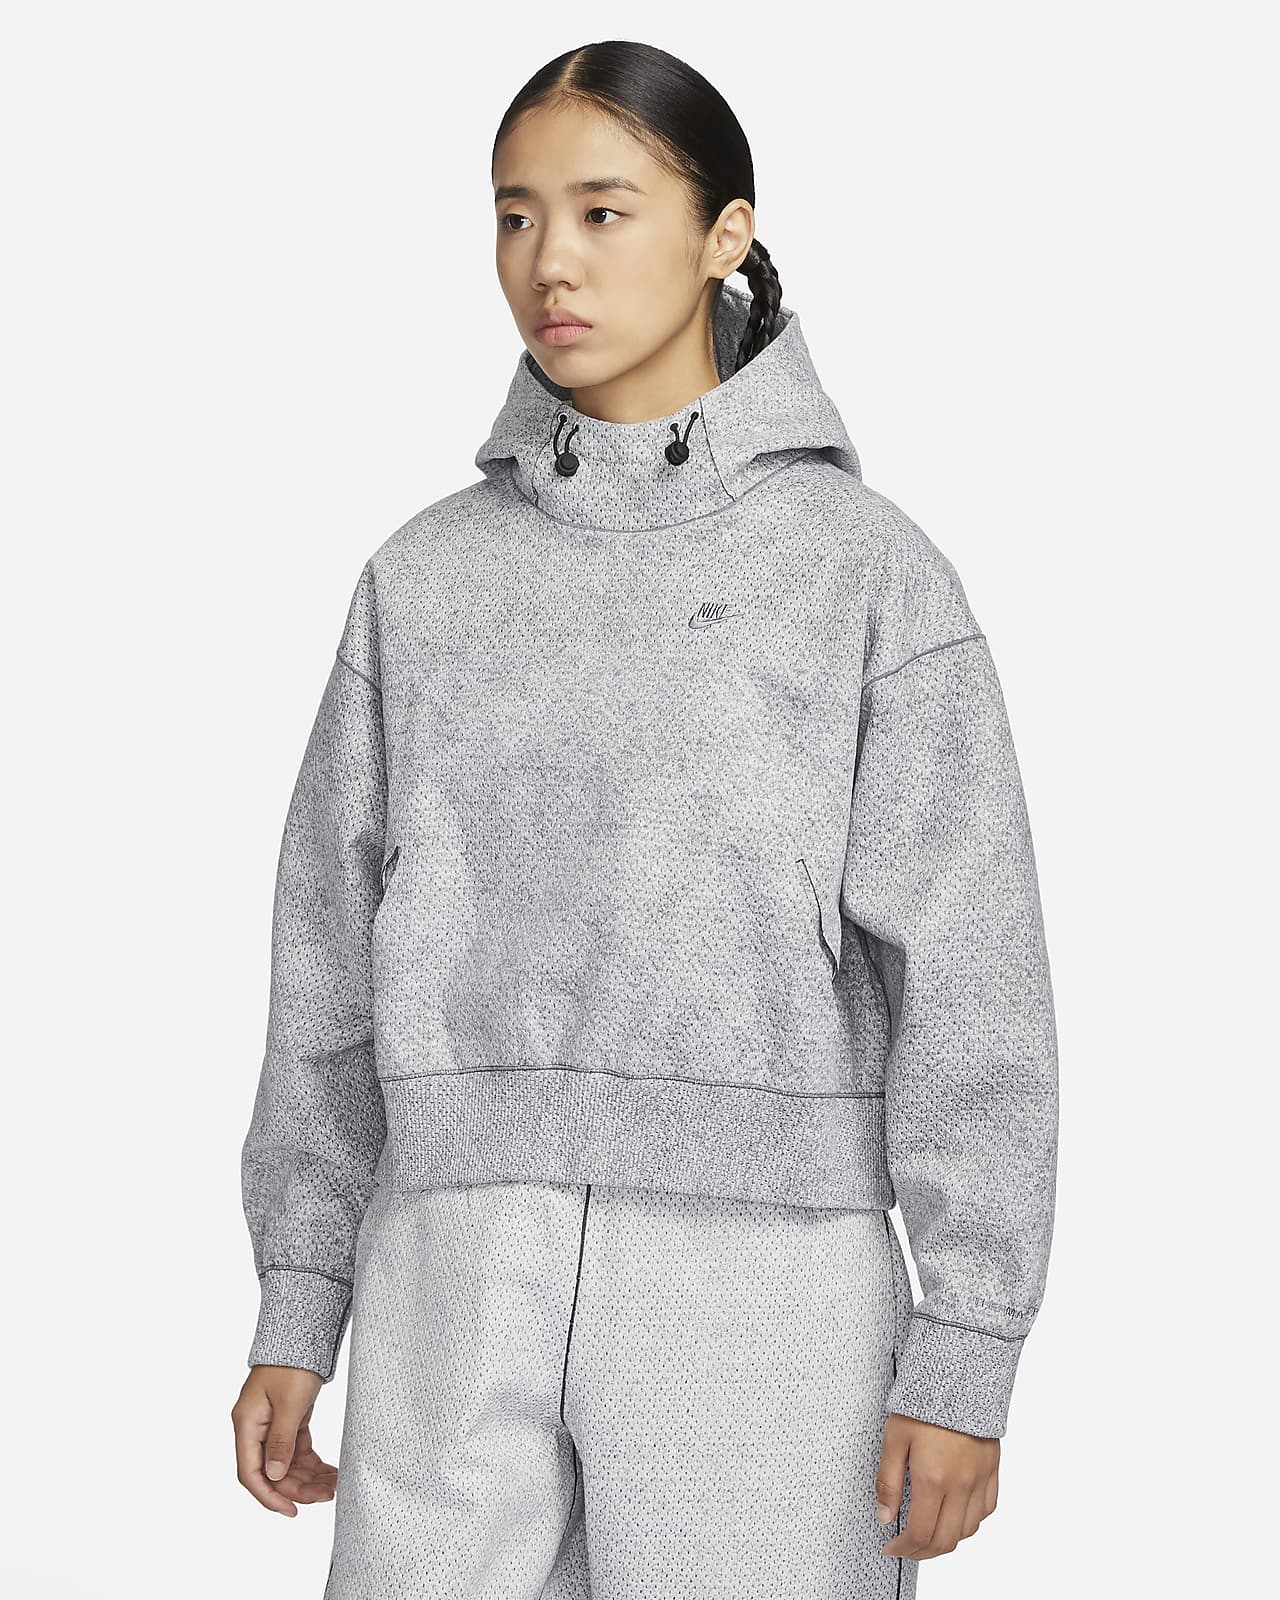 https://static.nike.com/a/images/t_PDP_1280_v1/f_auto,q_auto:eco/aa55a84d-7f2b-46ae-b0a1-3524afc22cb3/forward-hoodie-oversized-hoodie-sL6qjf.png